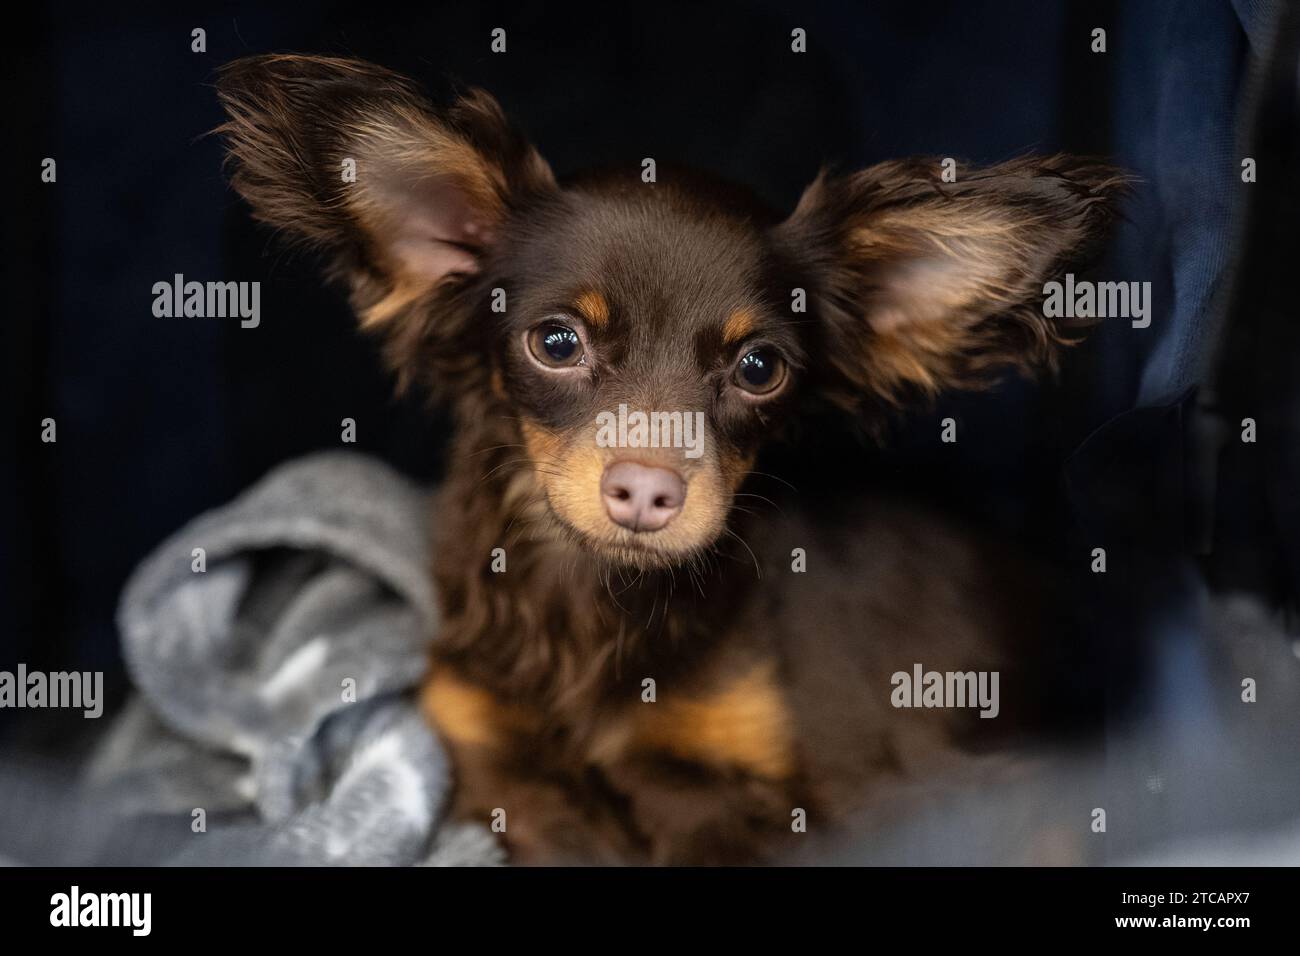 A small cute purebred dog, Russian toy Stock Photo